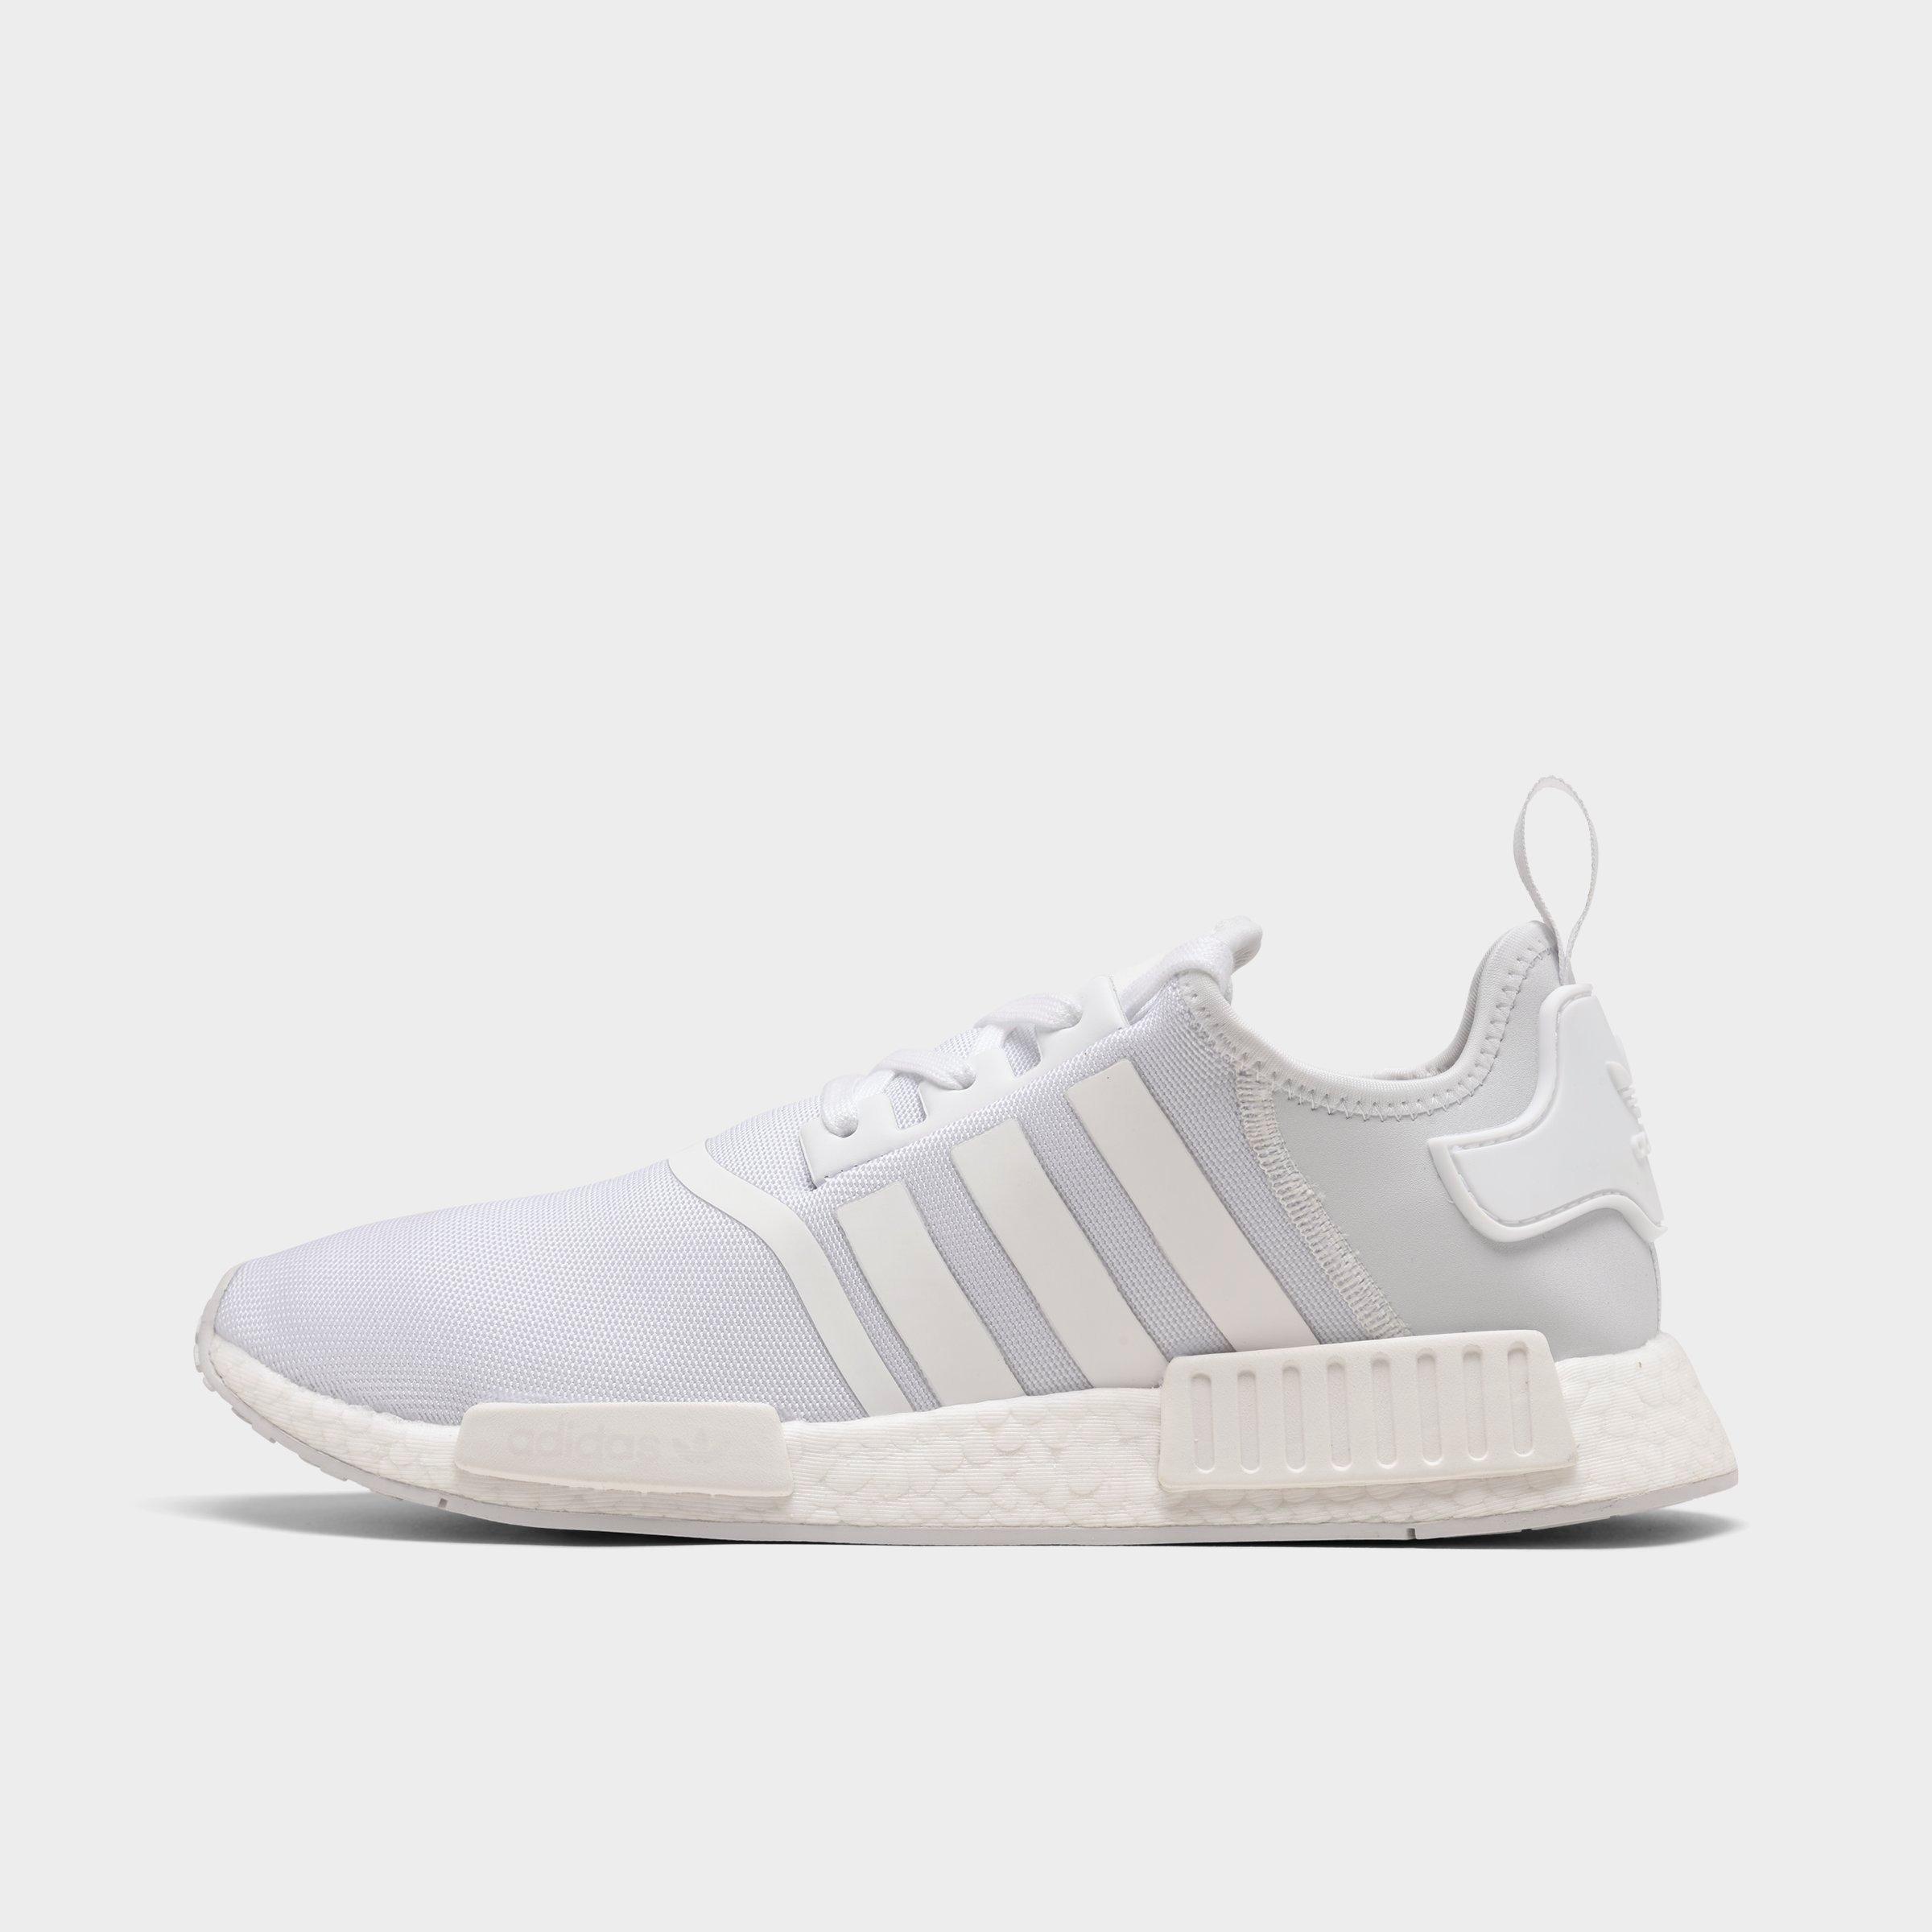 men's adidas nmd r1 casual shoes